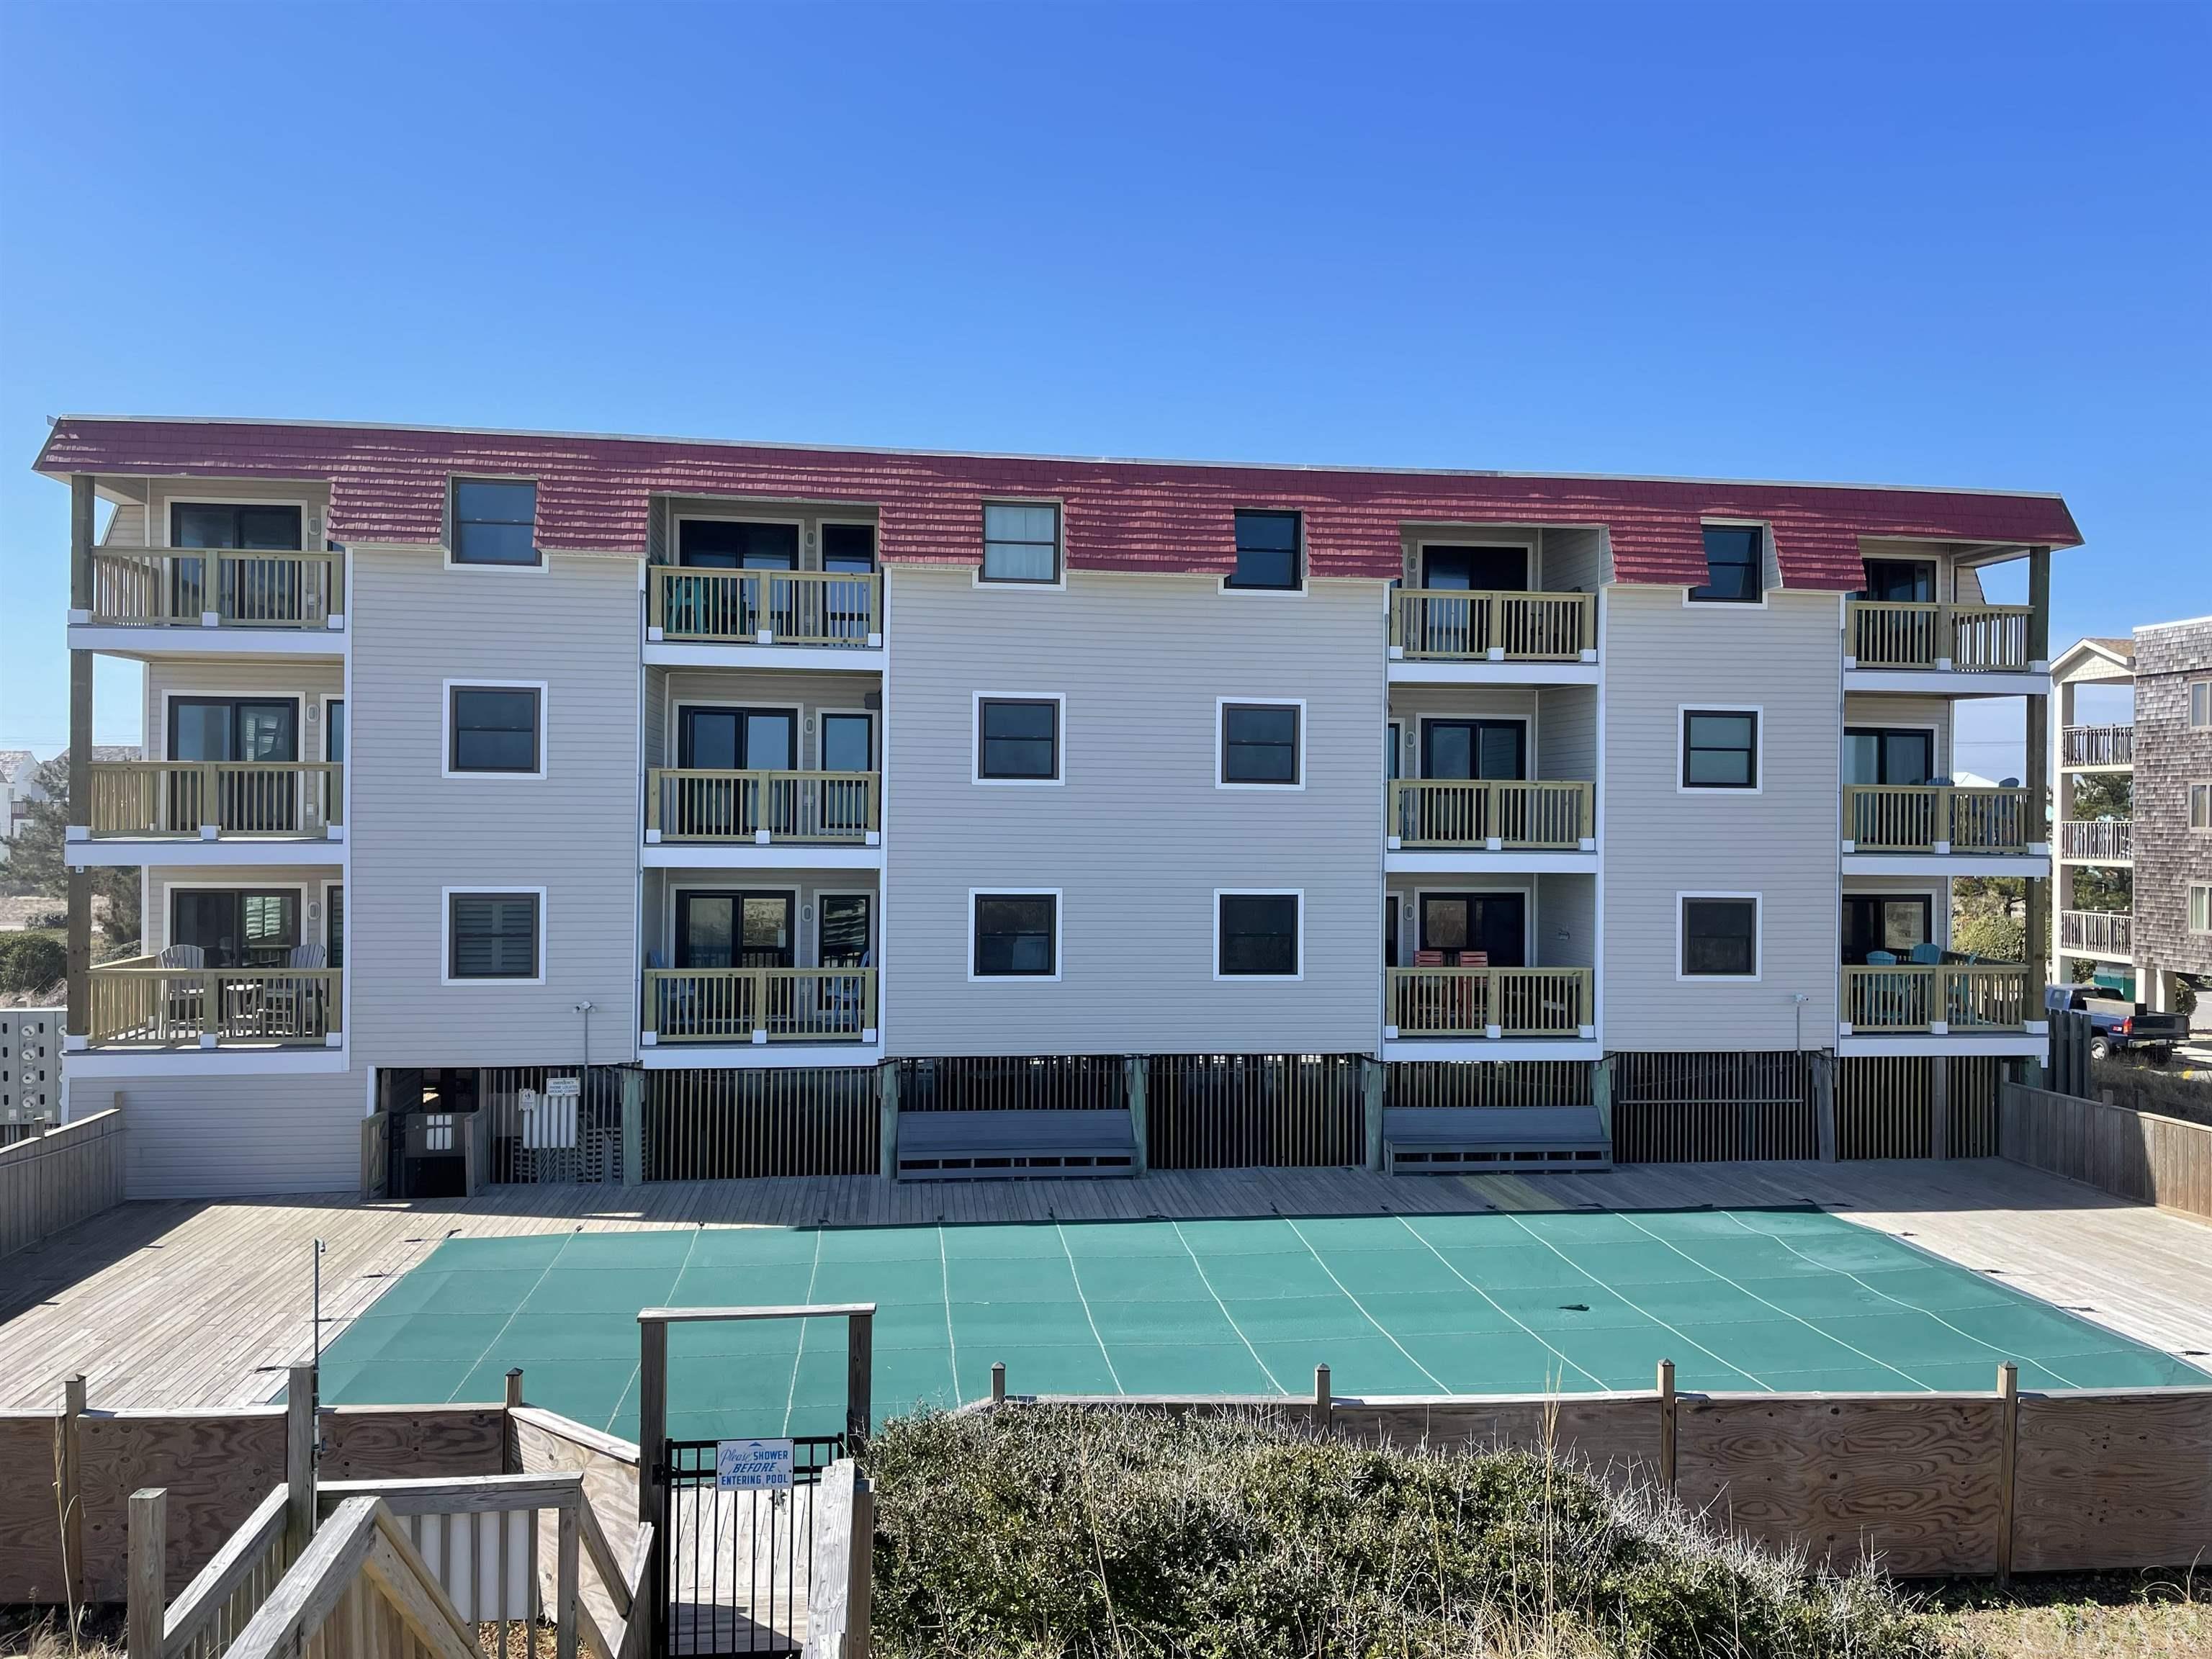 If you ever dreamed of owning an oceanfront property on the Outer Banks, this is your chance. And you don’t have to be a millionaire to do it! This bright, comfortable condo can be yours. It is ready for you and your family to enjoy. You can start a new chapter in your life, leave the hustle and bustle behind and discover all the treasures that the OBX has to offer. This can be your happy place, really – free of worries, filled with beach days, surfing, watching the sunrise over the Atlantic Ocean and so much more. This unit is perfect for somebody looking for a low maintenance, updated and well-maintained place. You don’t have to do anything here – the flooring has been replaced, popcorn ceilings scrapped, windows and sliders were also replaced (see a complete list of updates). Even some of the furniture is brand new. The condo building was also recently updated with all new decks and siding on the east side and it offers an elevator for those who don’t want to carry their suitcases and groceries. This condo has not been in a rental program, but it can easily be turned into a vacation rental home (and your investment home - rental projection for $53,527!). Nags Head is the place to be when it comes to a perfect vacation spot. It offers numerous attractions including the tallest living sand dune in the eastern Unites States - Jockey’s Ridge, Jennette’s Pier, lots of great restaurants (Blue Moon, Owen’s, Sugar Creek – just to name a few), lots of shops and miles of beautiful beaches for you to explore.